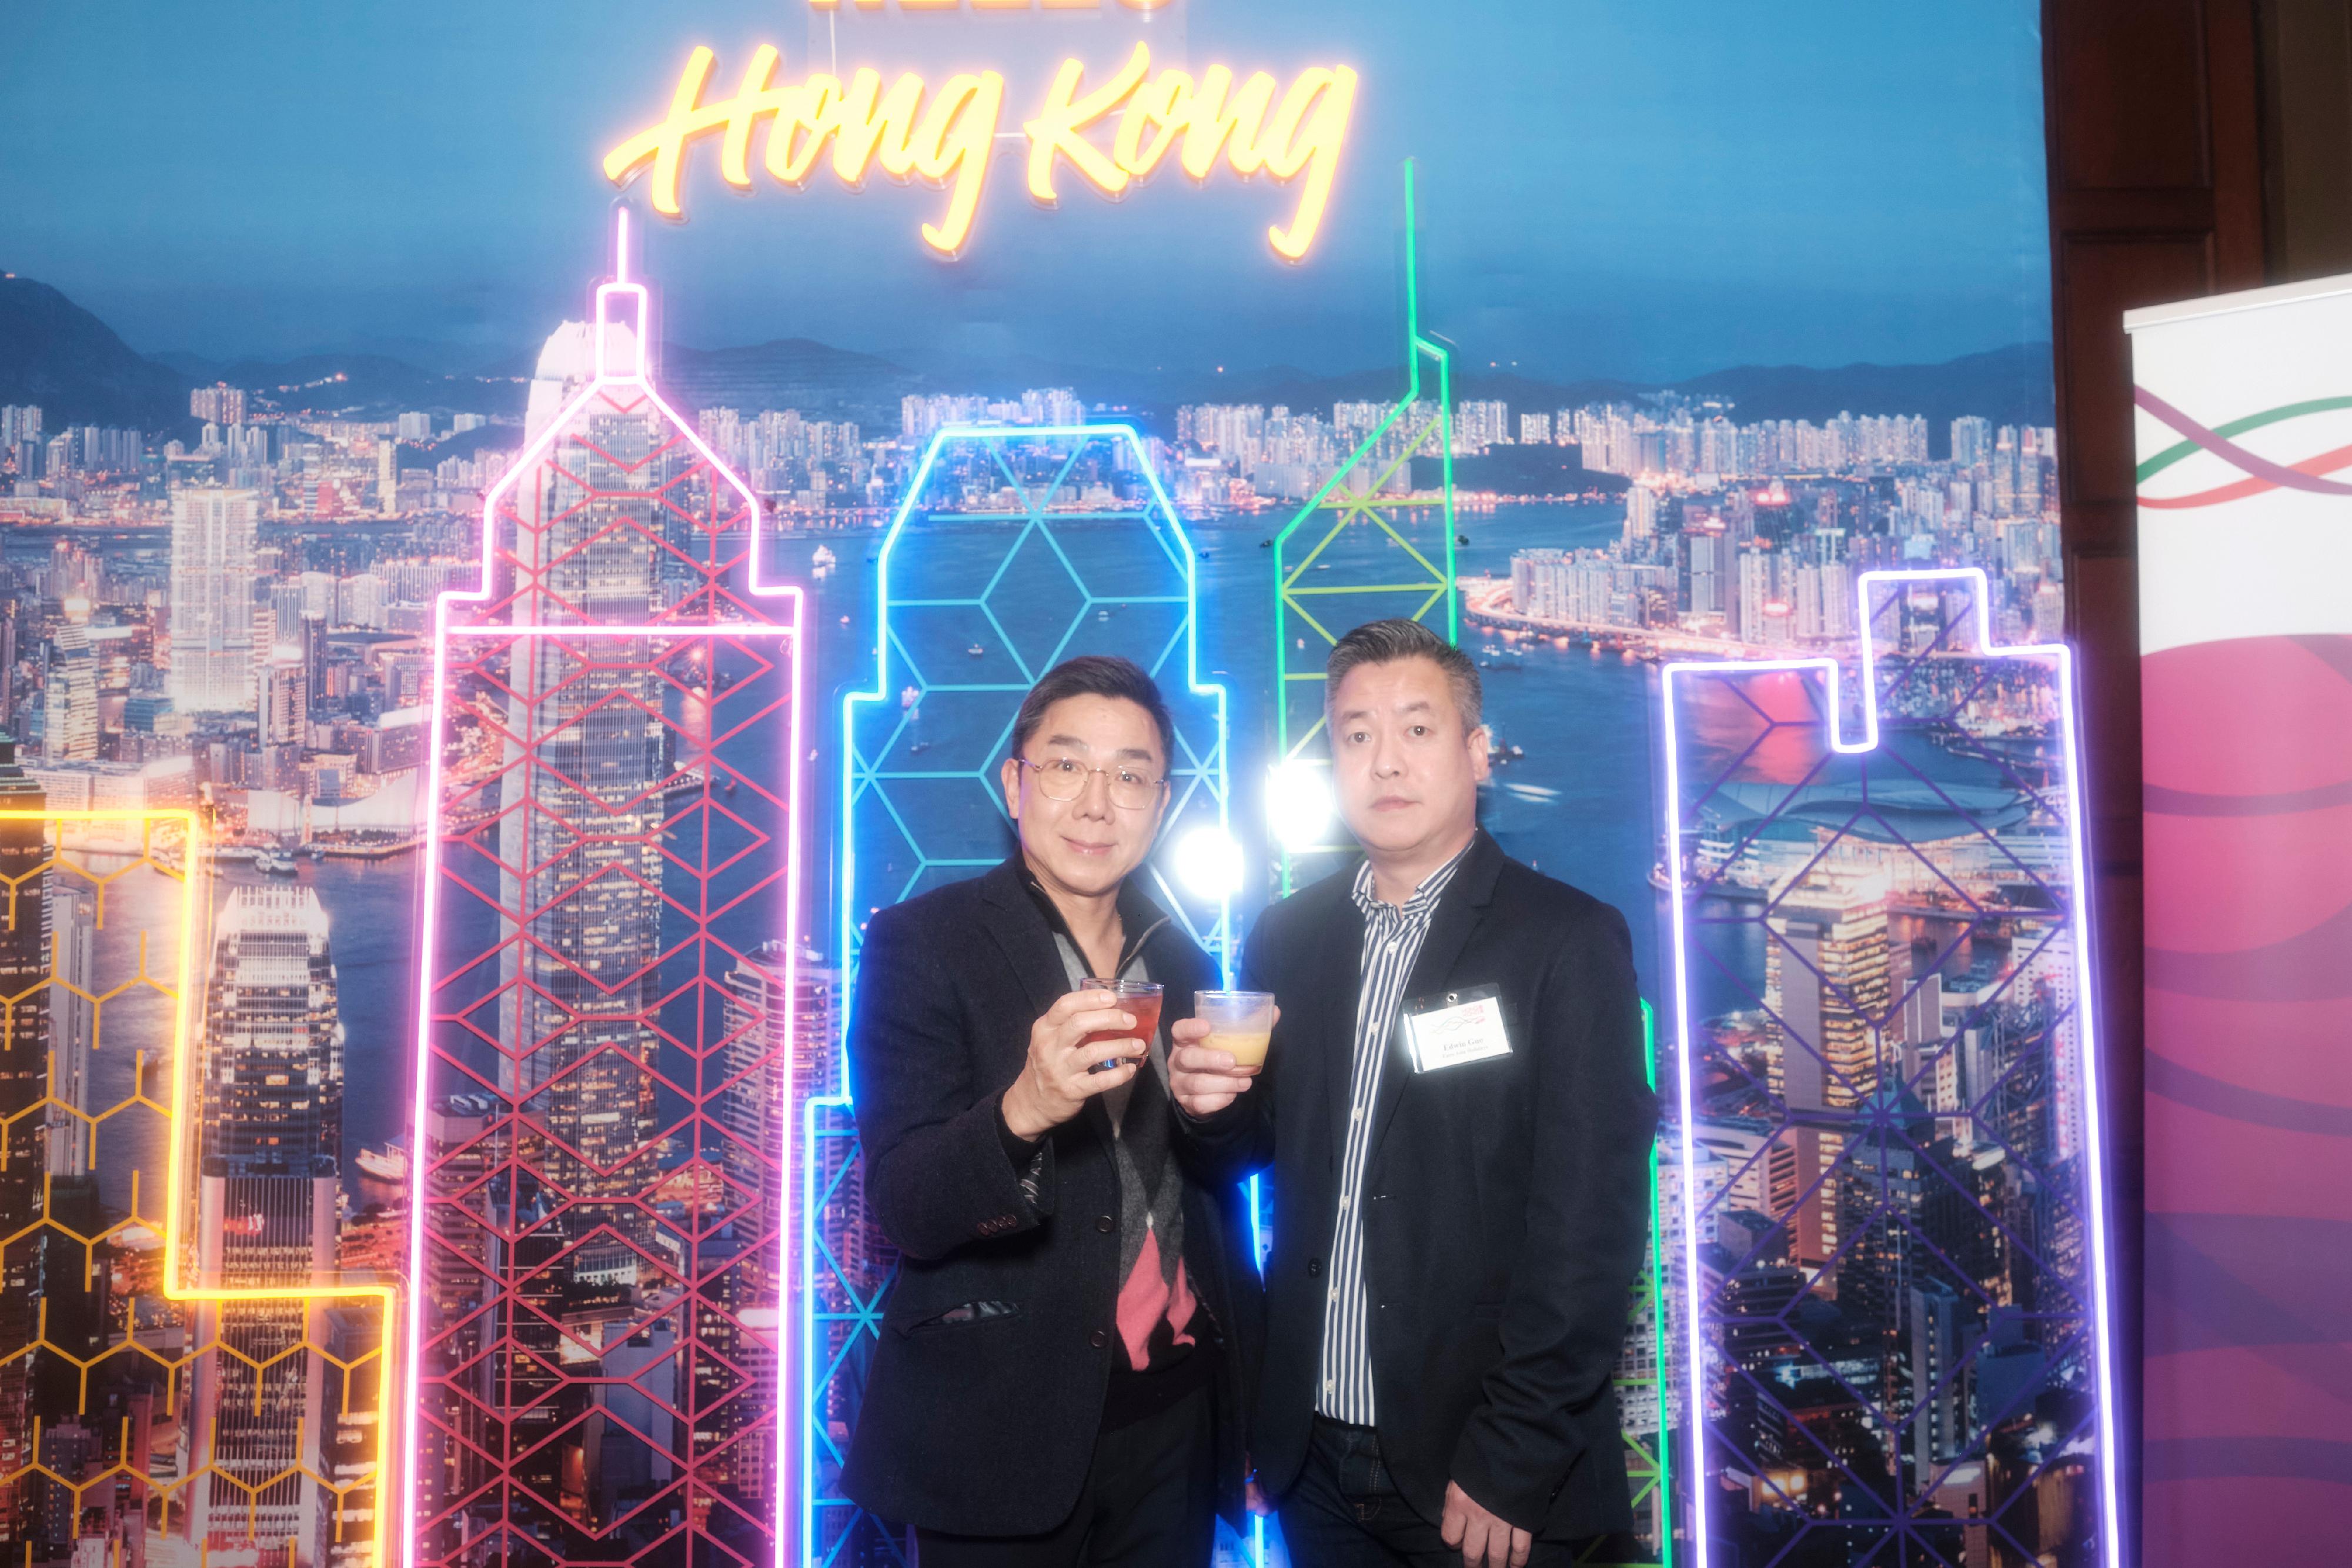 The Hong Kong Economic and Trade Office in New York hosted its spring reception in New York on February 15 (New York time) to celebrate the Year of the Dragon. A touch of Hong Kong magic was added to the evening’s celebration when a cocktail inspired by the famous Hong Kong dessert mango pomelo sago, and another one using an award-winning craft gin distilled in Hong Kong, were served.